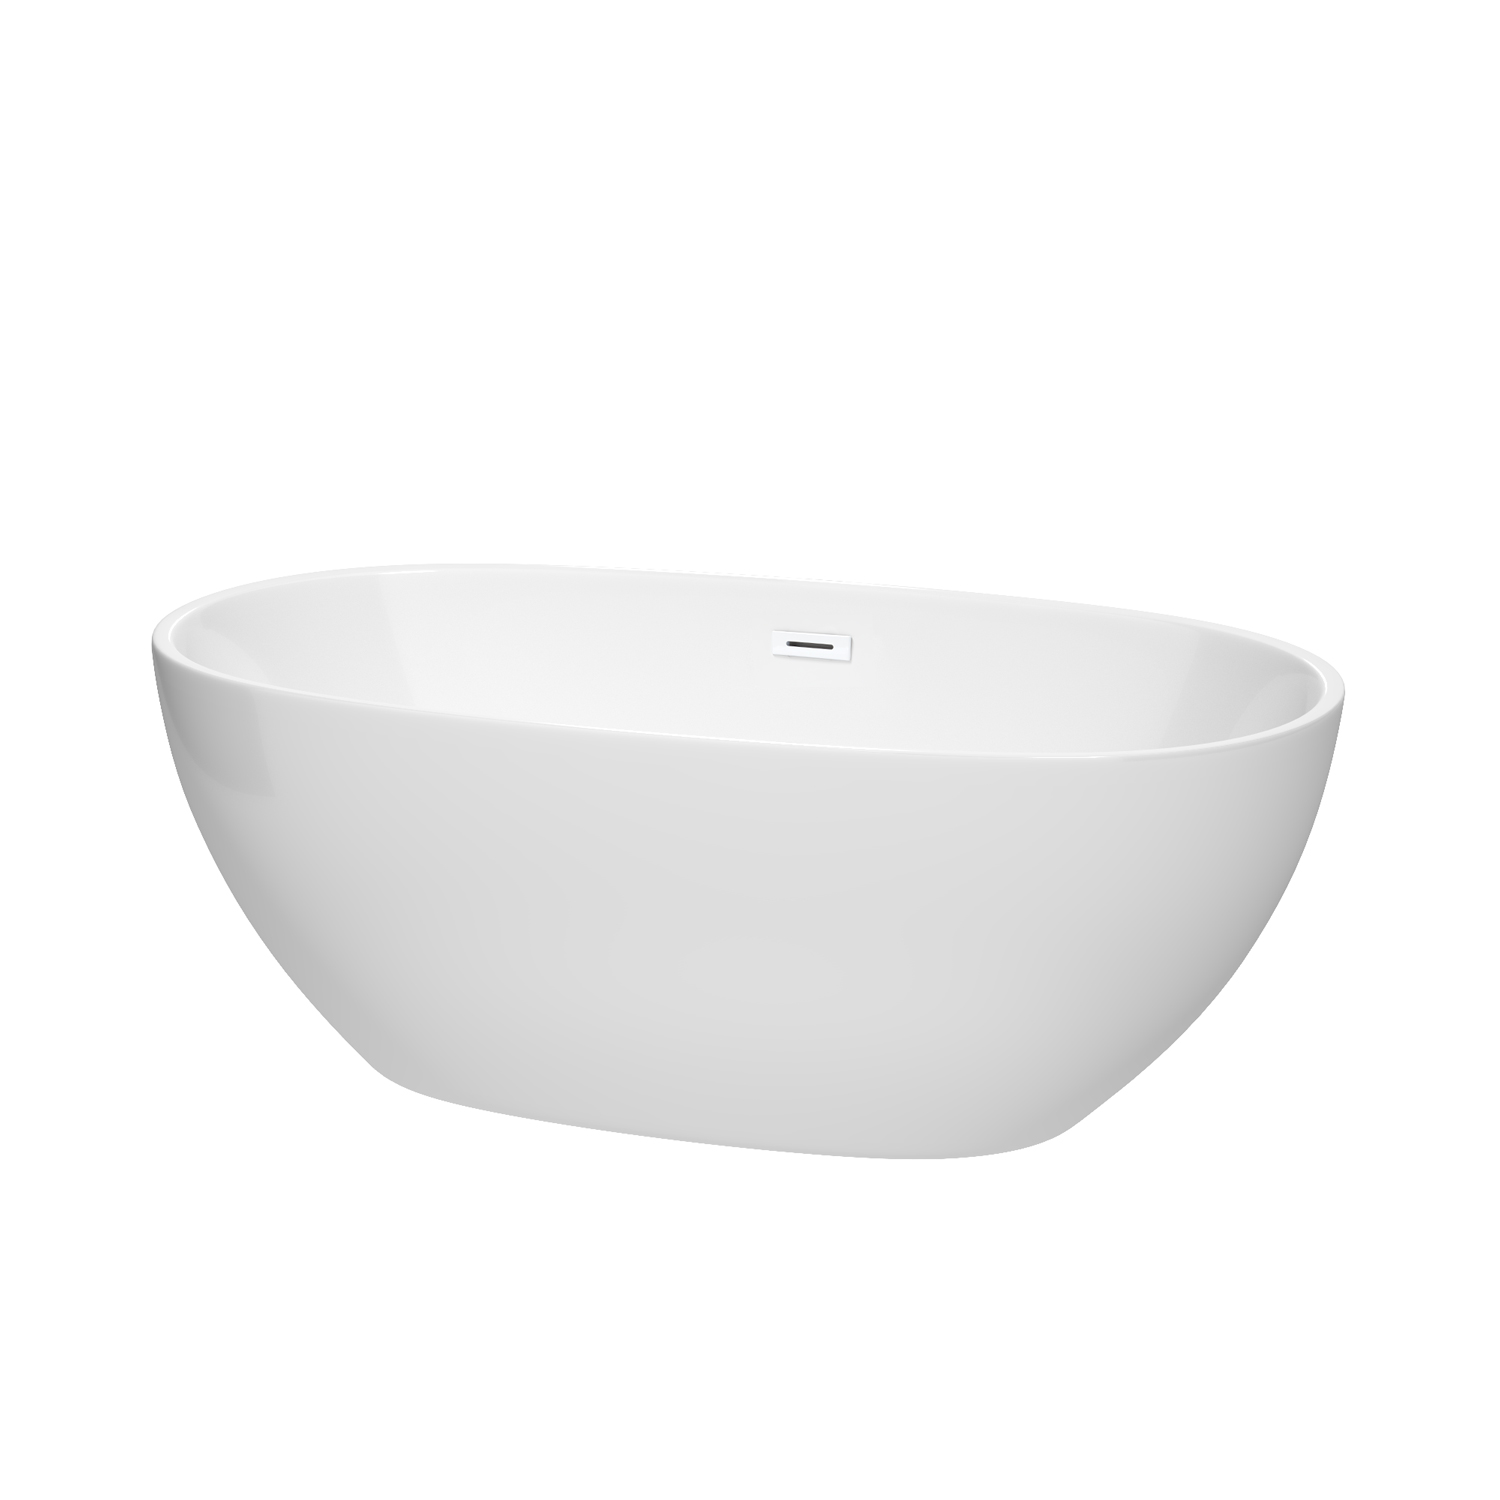 63" Freestanding Bathtub in White with Shiny White Drain and Overflow Trim Finish